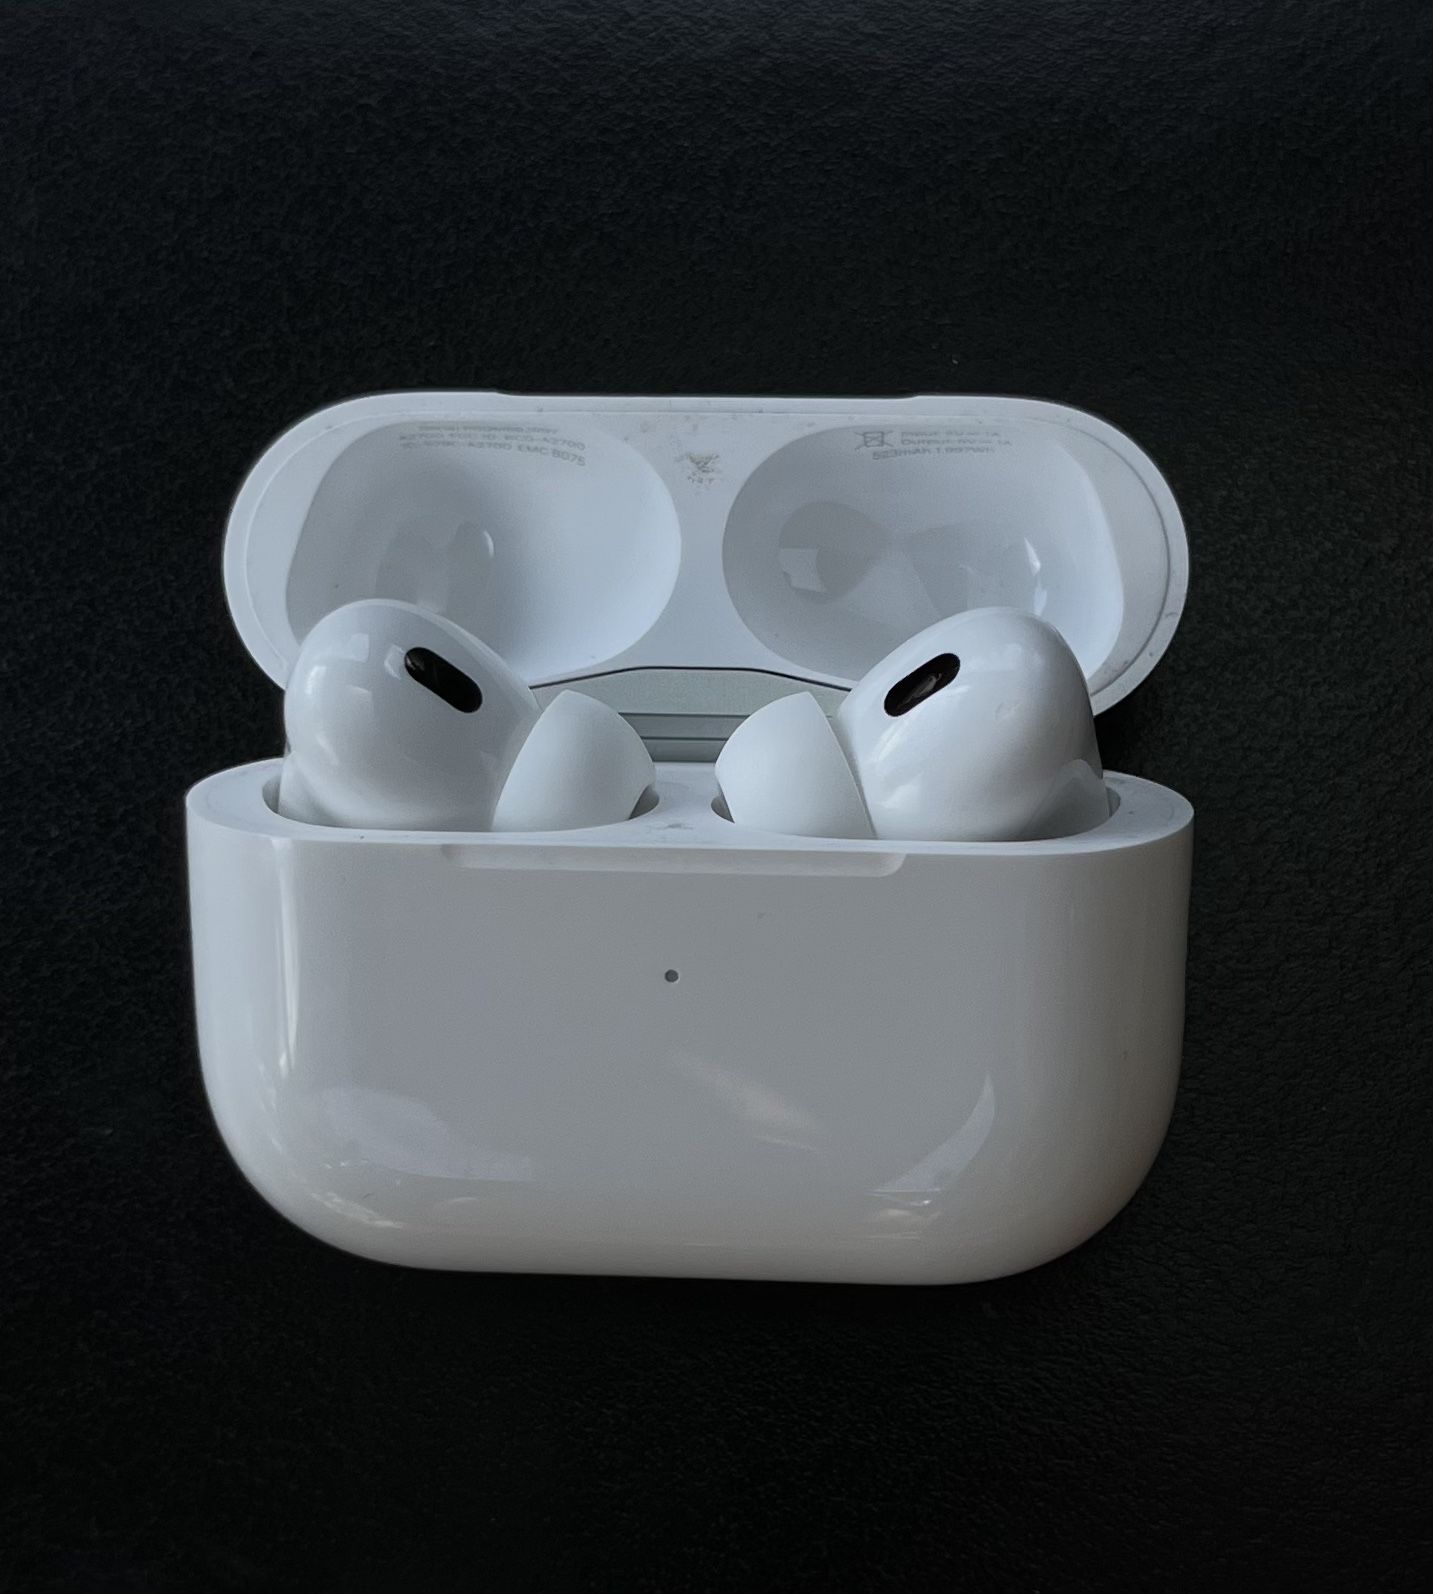 AirPod Pro 2nd Generation With MagSafe Wireless Charging Case